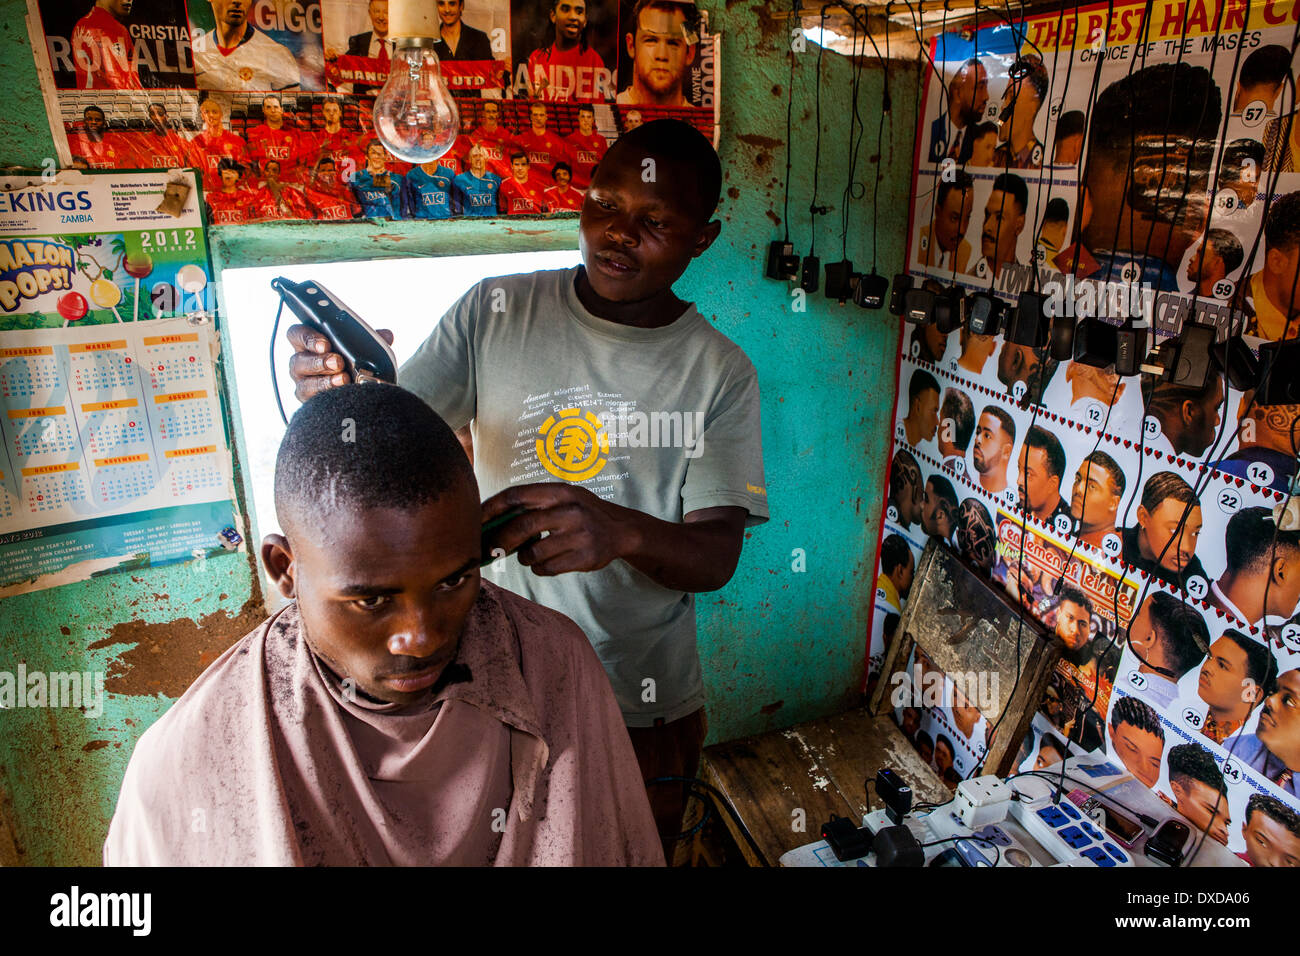 A hairdresser and a customer in a hair salon in Malawi, Africa Stock Photo